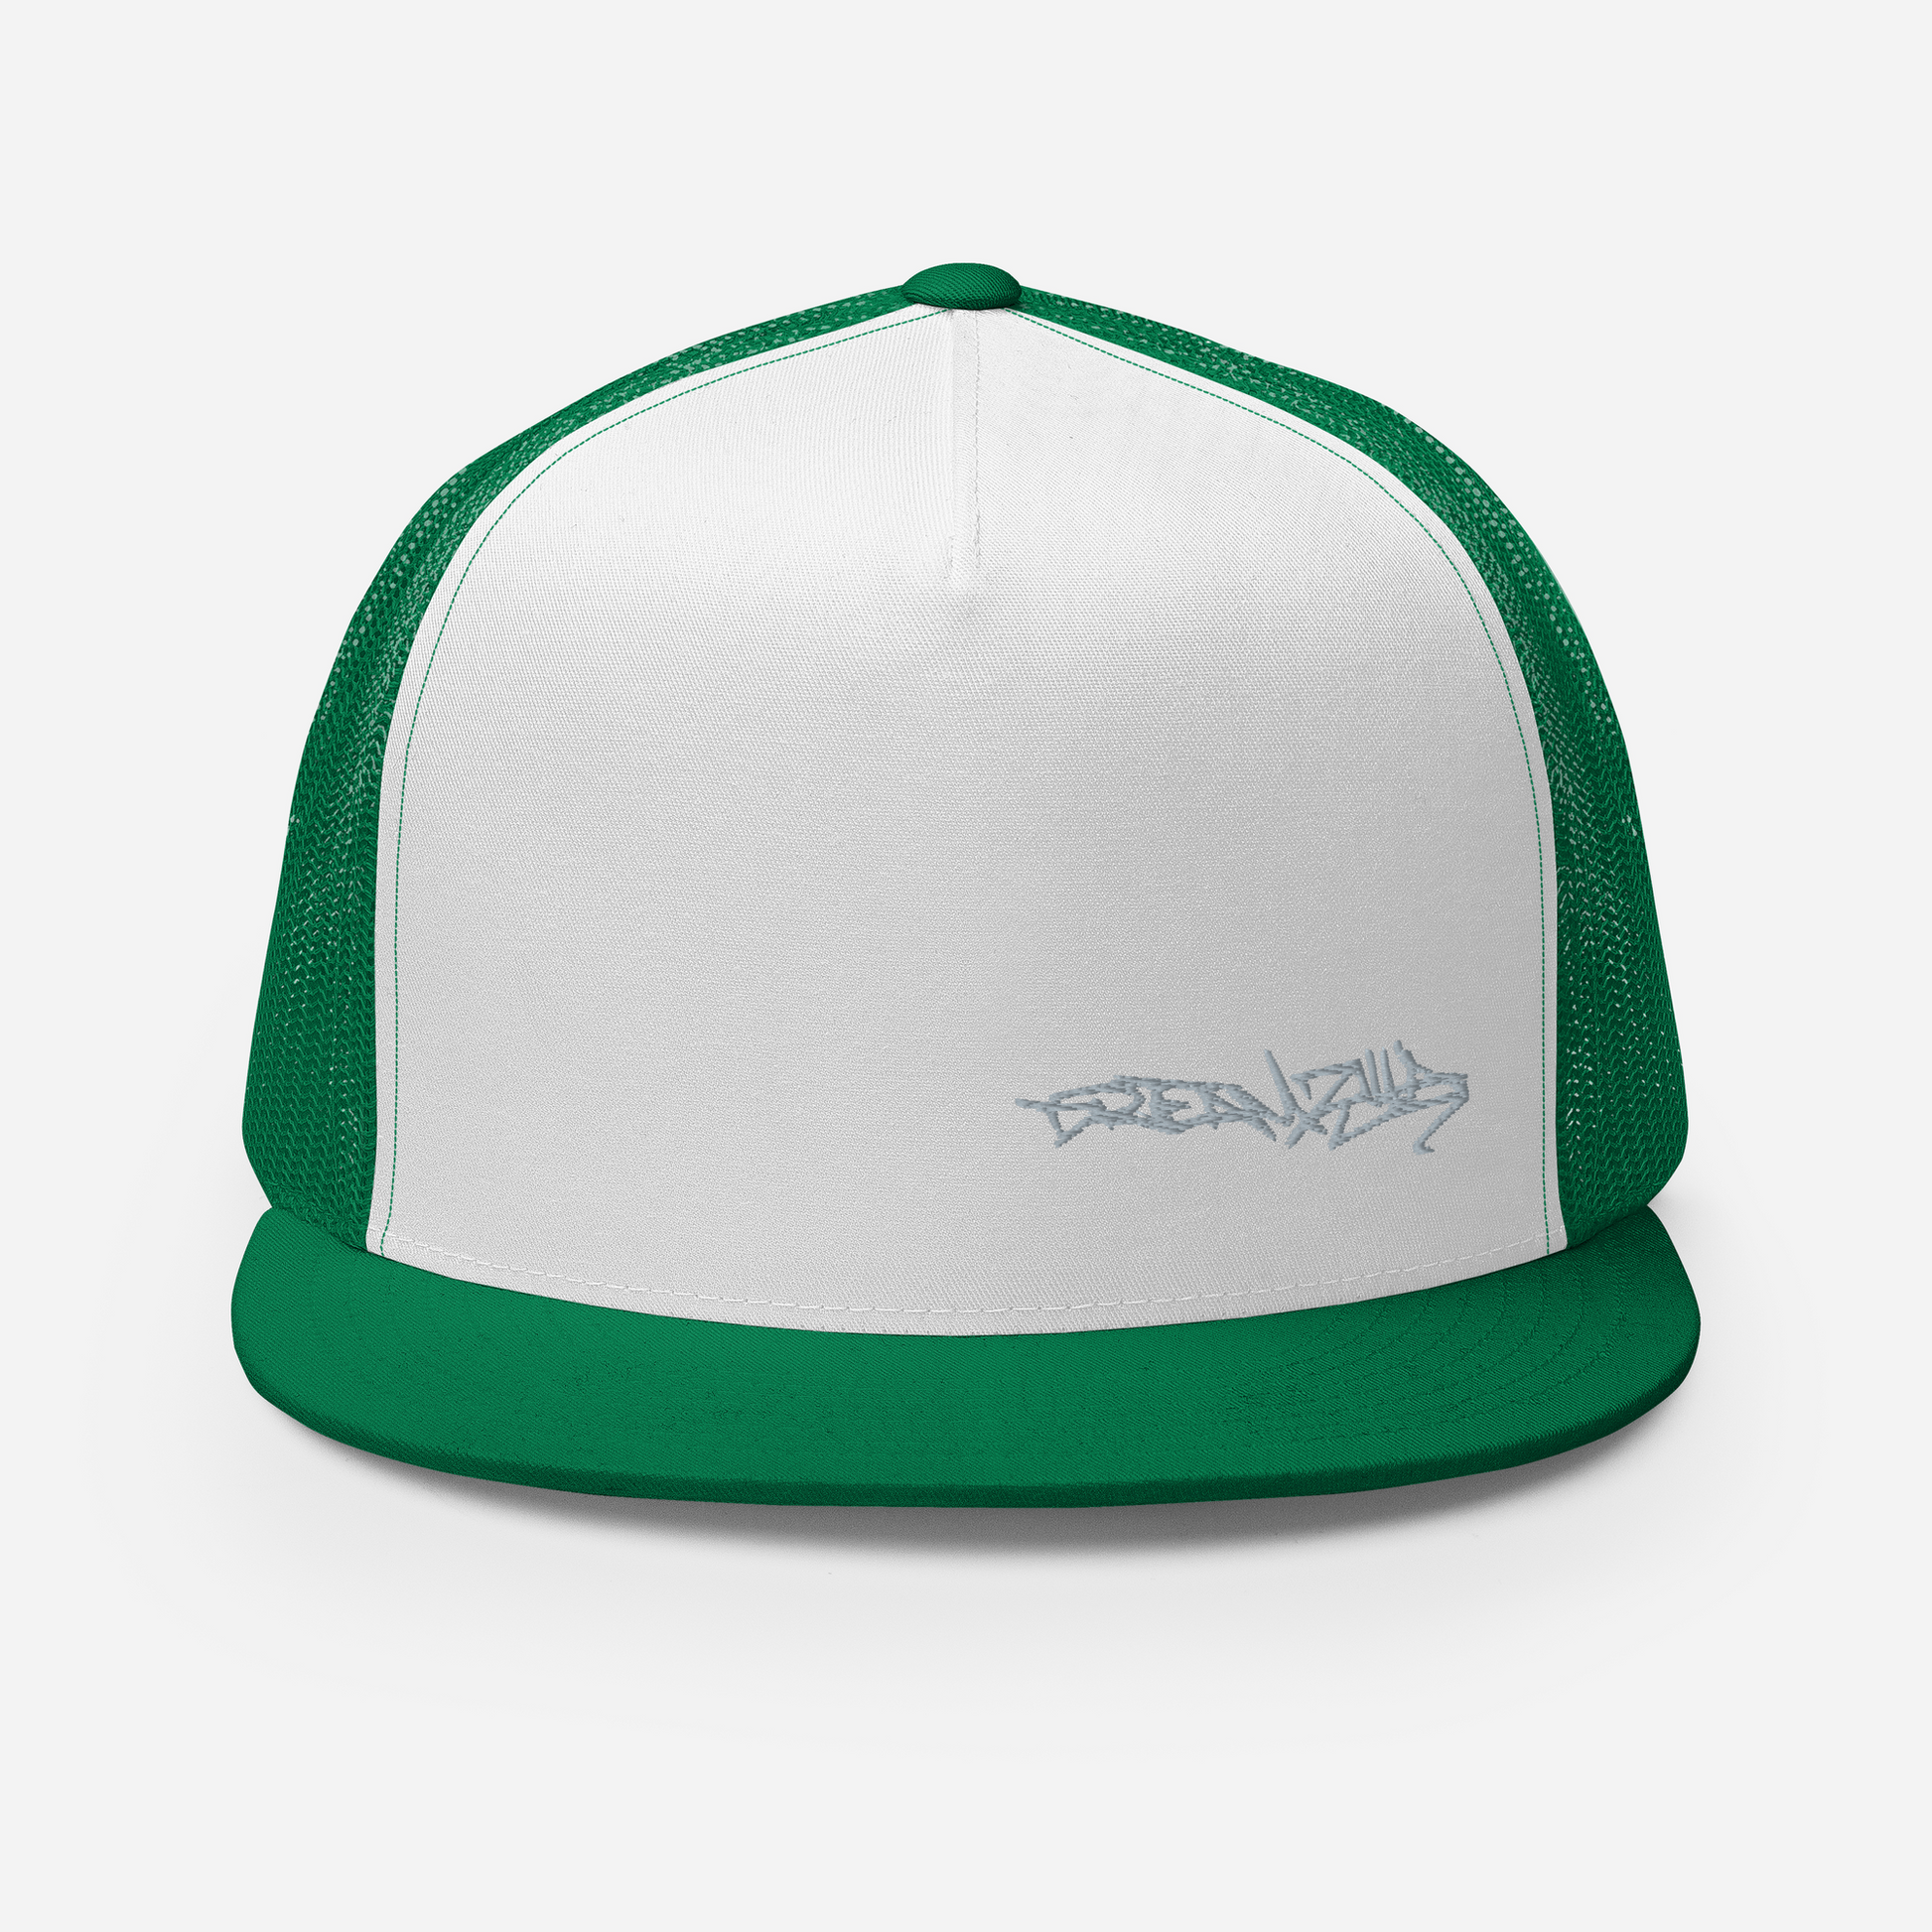 Graffiti Tag Trucker Cap in White with Kelly Brim and Back